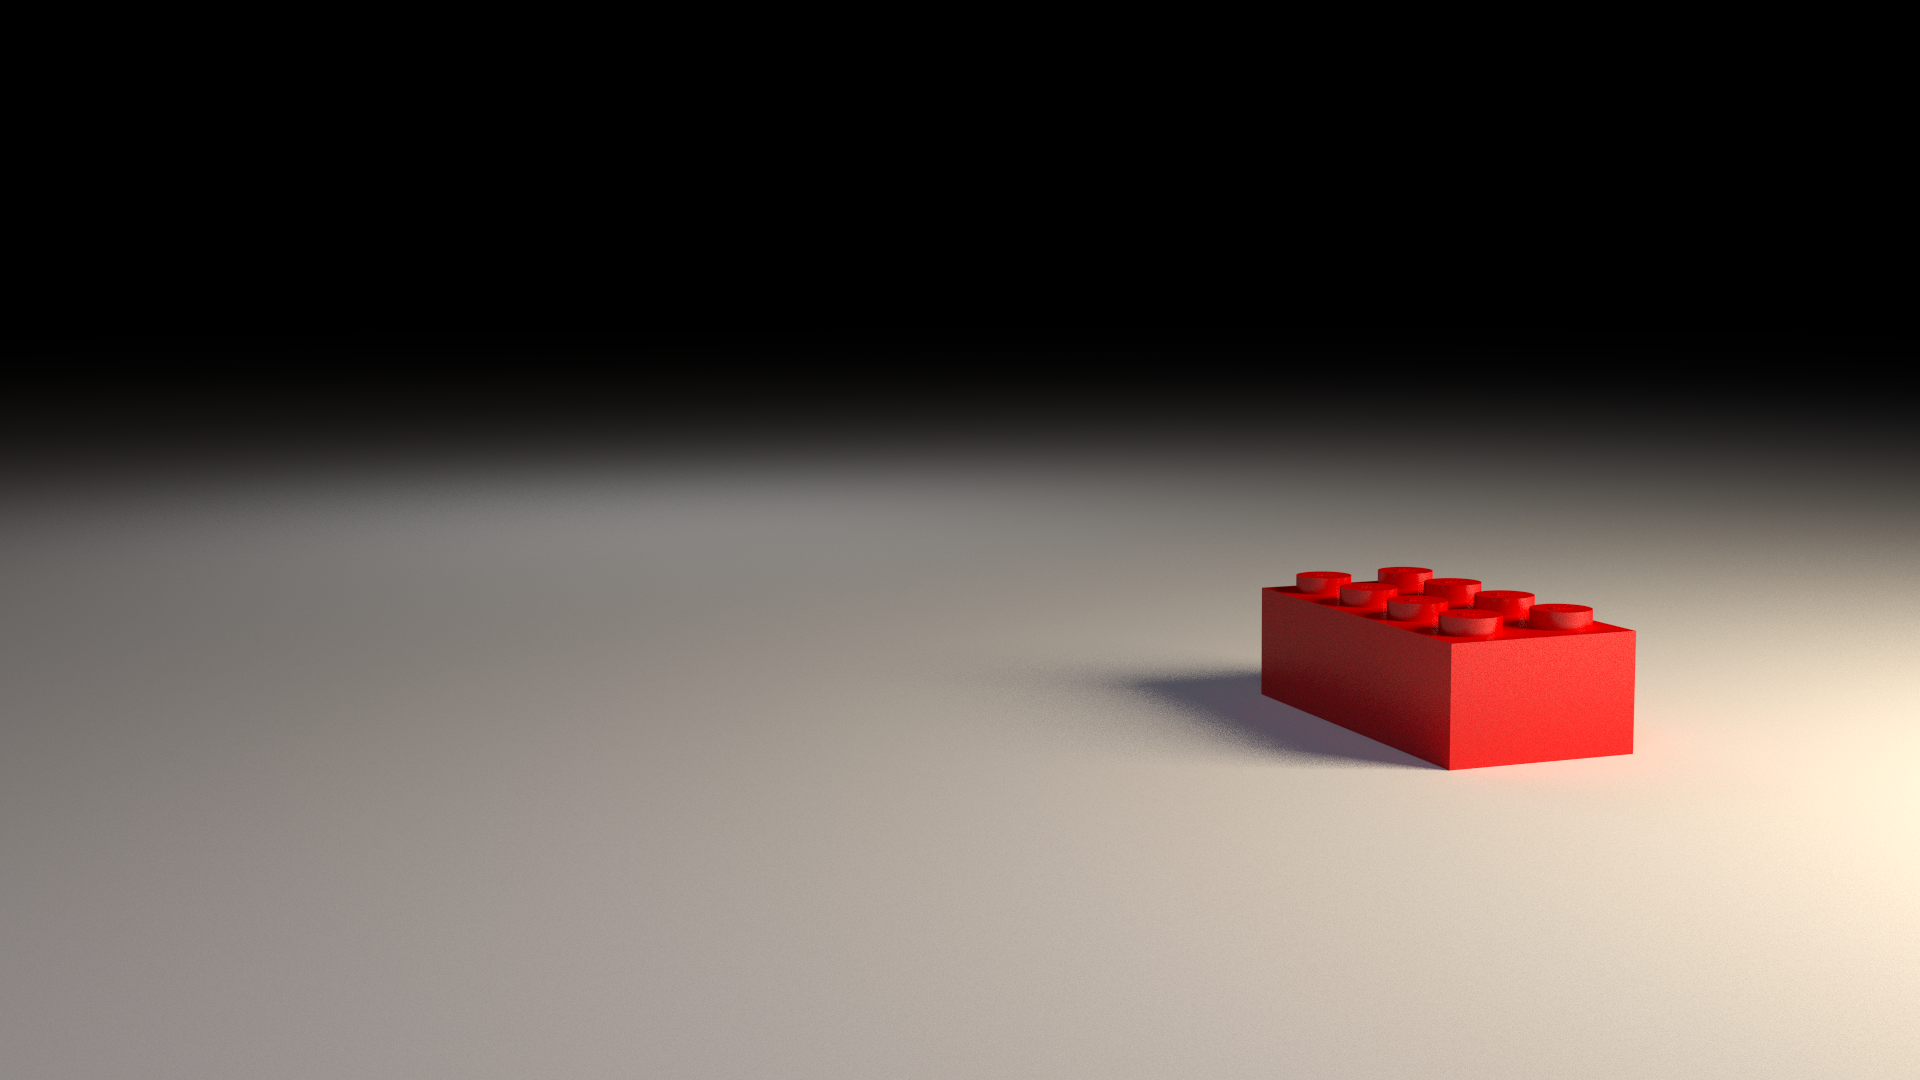 Made a Lego Brick Wallpapers in Blender, Thoughts? : blender.